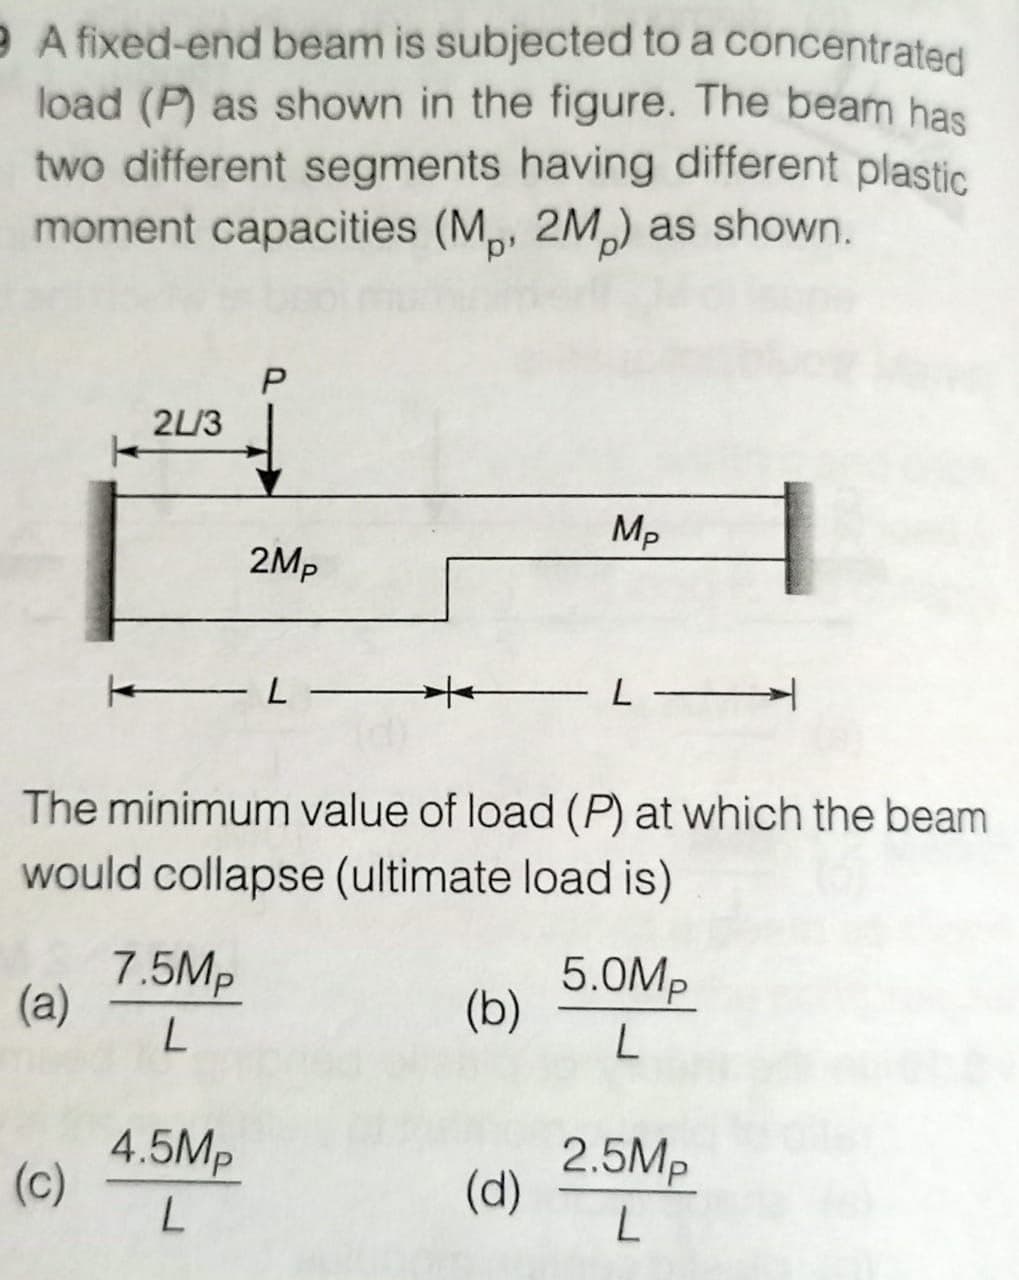 e A fixed-end beam is subjected to a concentrated
load (P) as shown in the figure. The beam has
two different segments having different plastic
moment capacities (M., 2M) as shown.
P
2L/3
Mp
← L
- -
The minimum value of load (P) at which the beam
would collapse (ultimate load is)
7.5Mp
(a)
(b)
5.0Mp
L
L
2.5Mp
(c)
4.5Mp
L
(d)
L
2Mp
*